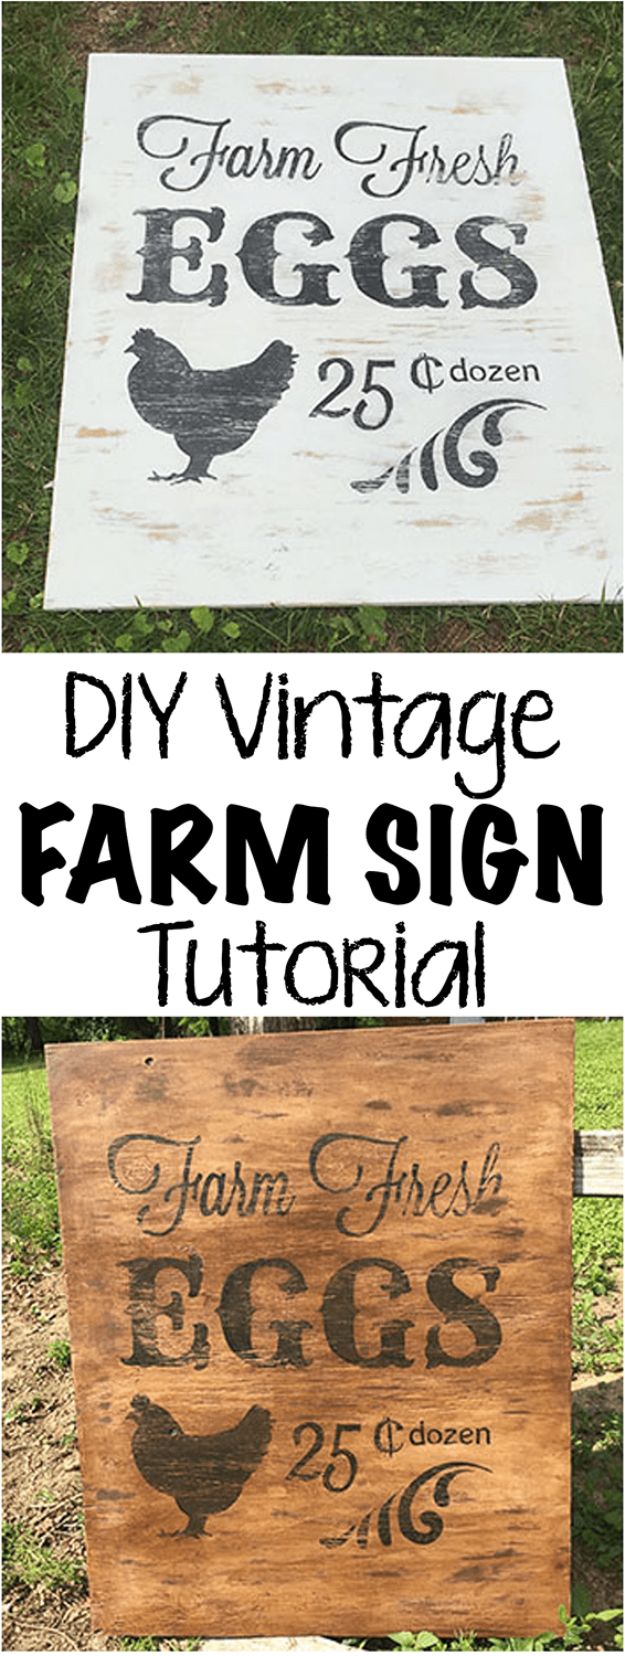 DIY Vintage Signs - DIY Vintage Farm Sign - Rustic, Vintage Sign Projects to Make At Home - Creative Home Decor on a Budget and Cheap Crafts for Living Room, Bedroom and Kitchen - Paint Letters, Transfer to Wood, Aged Finishes and Fun Word Stencils and Easy Ideas for Farmhouse Wall Art http://diyjoy.com/diy-vintage-signs